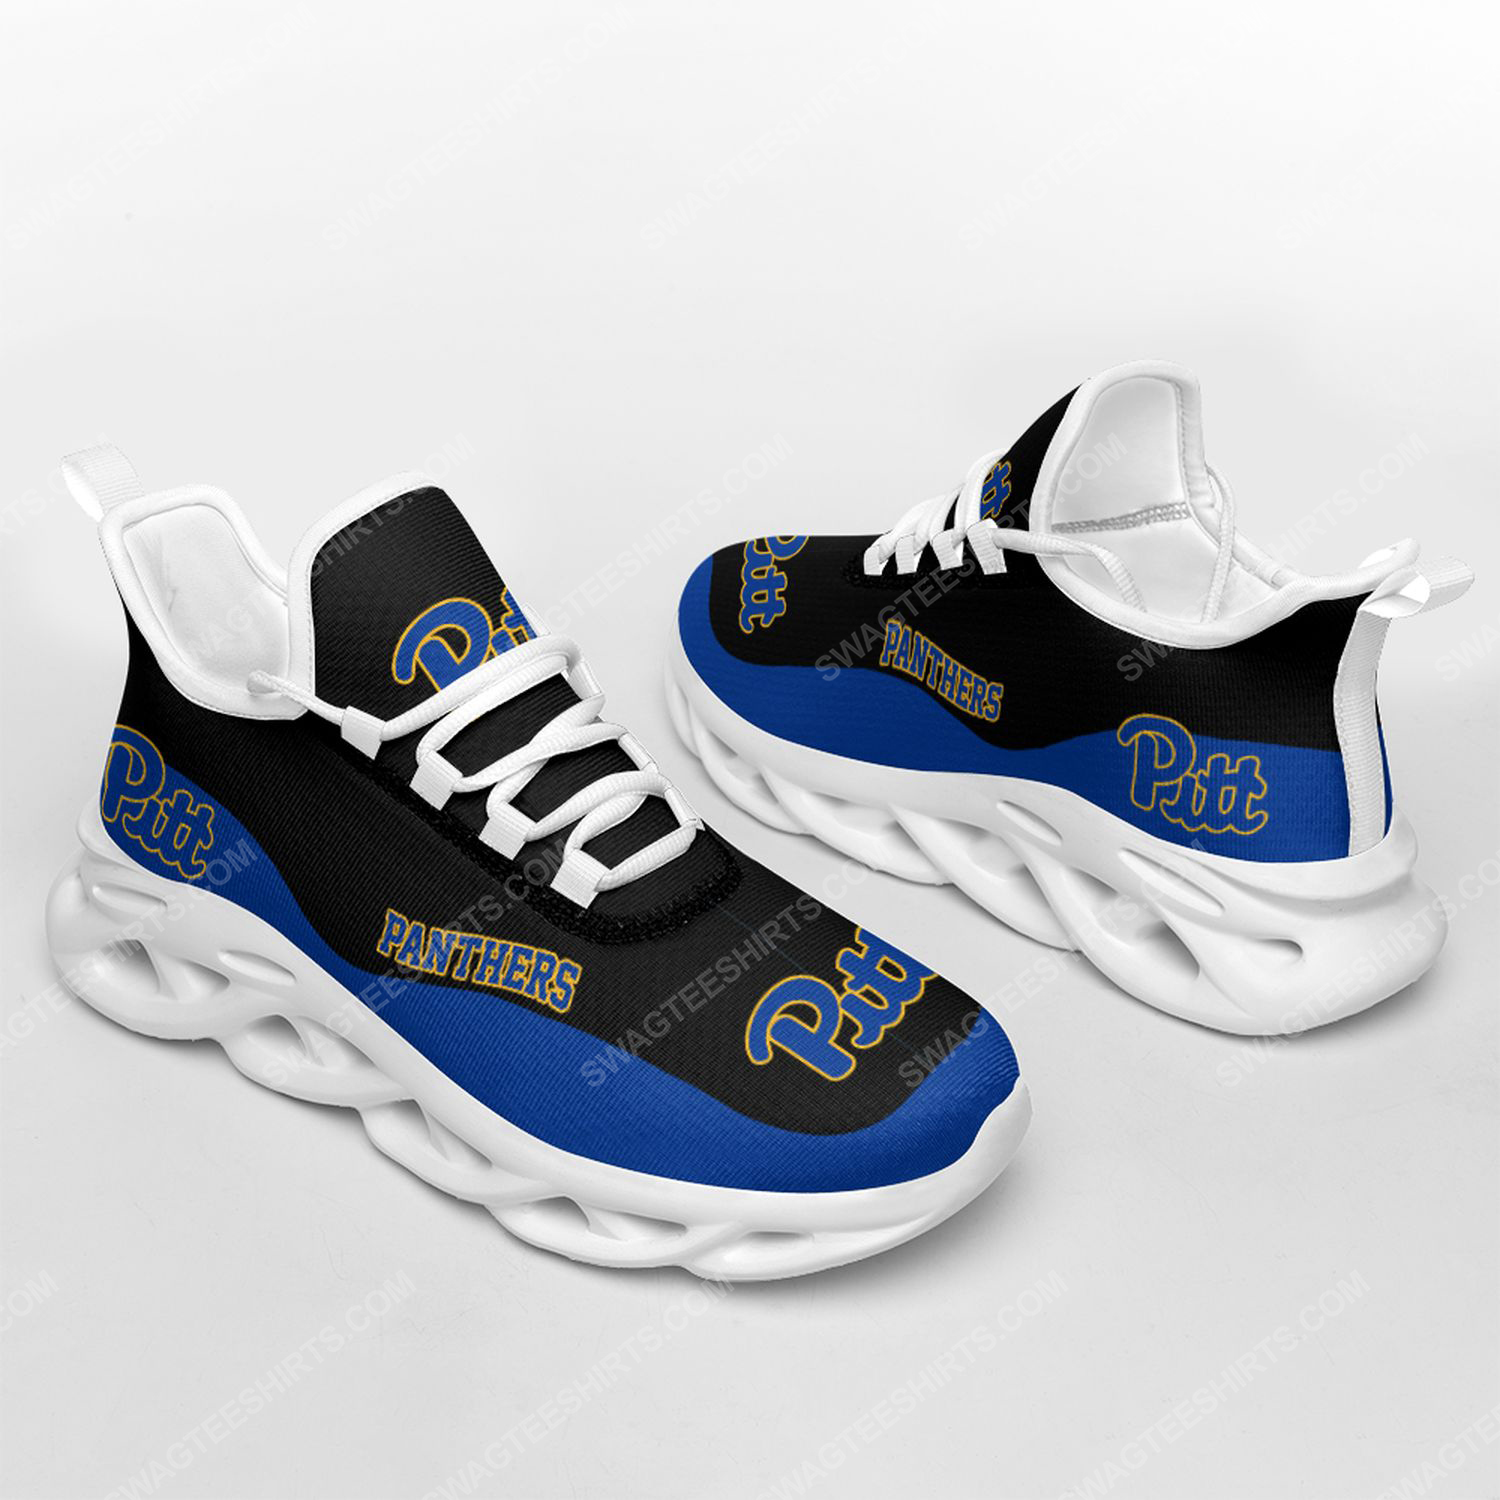 Pittsburgh panthers football team max soul shoes 2